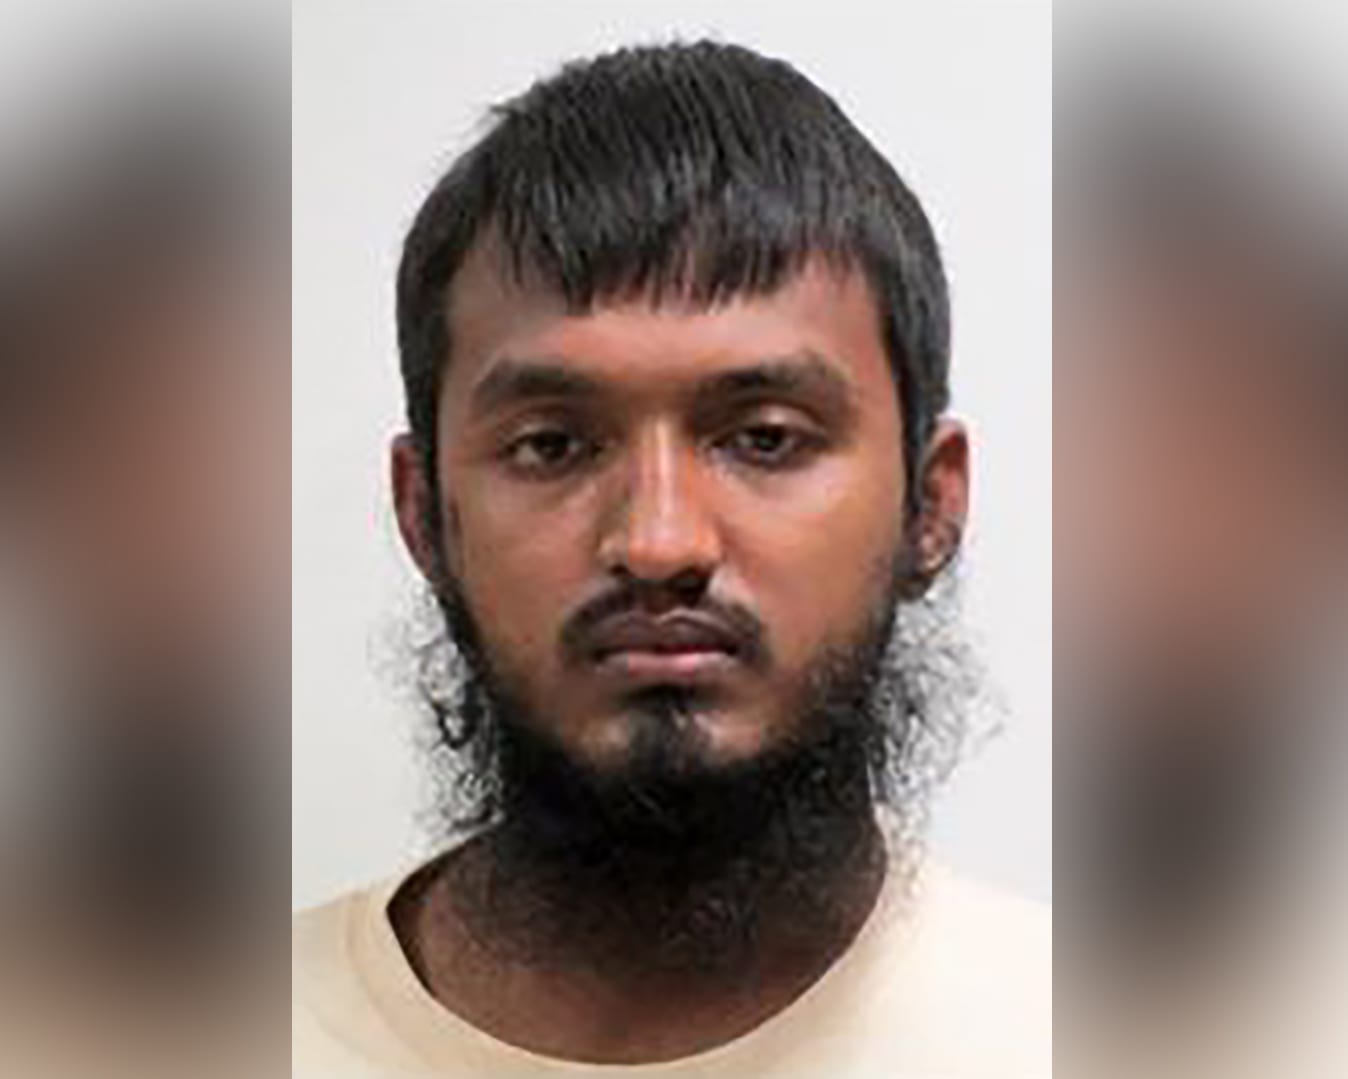 Ahmed Faysal, a 27-year-old Bangladeshi, was given a jail sentence of 32 months, or two years and eight months, after he was found guilty of five offences under the Terrorism (Suppression of Financing) Act.